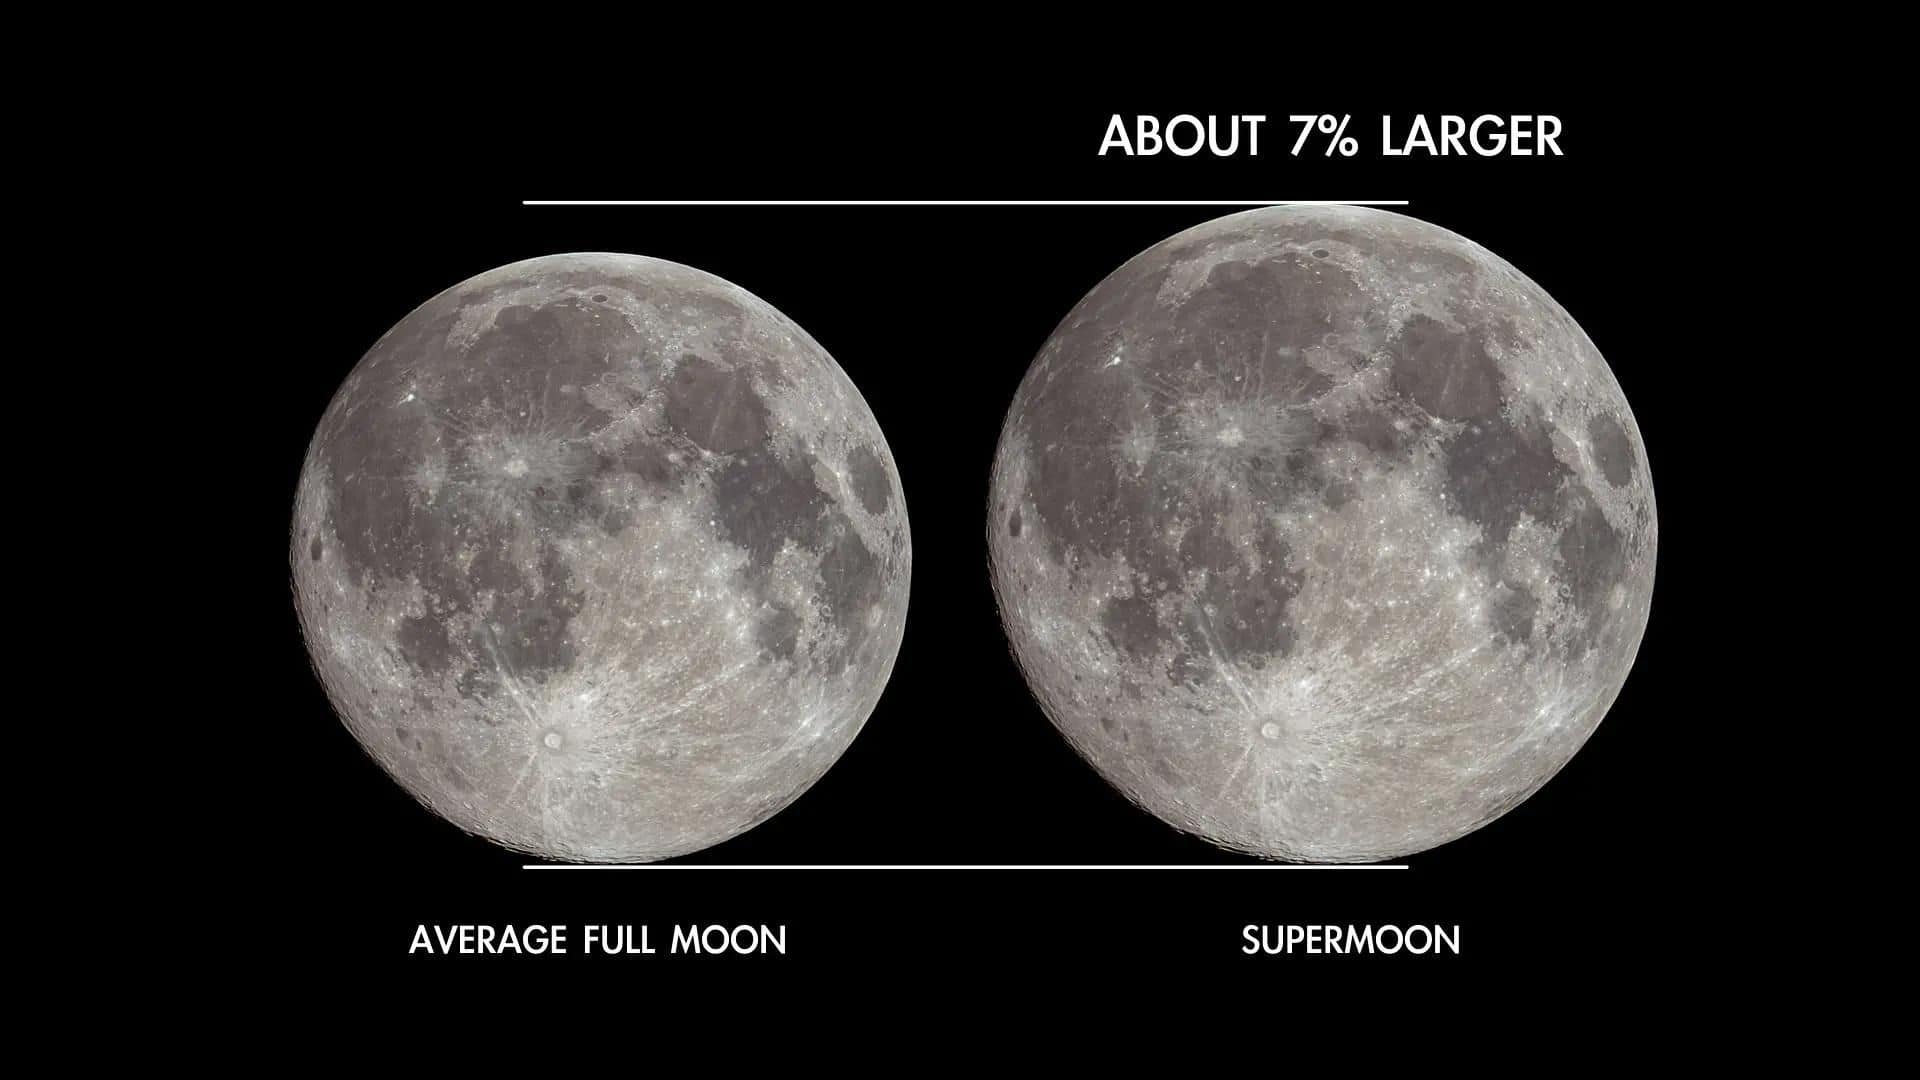 A supermoon is about 7% larger than an average full moon